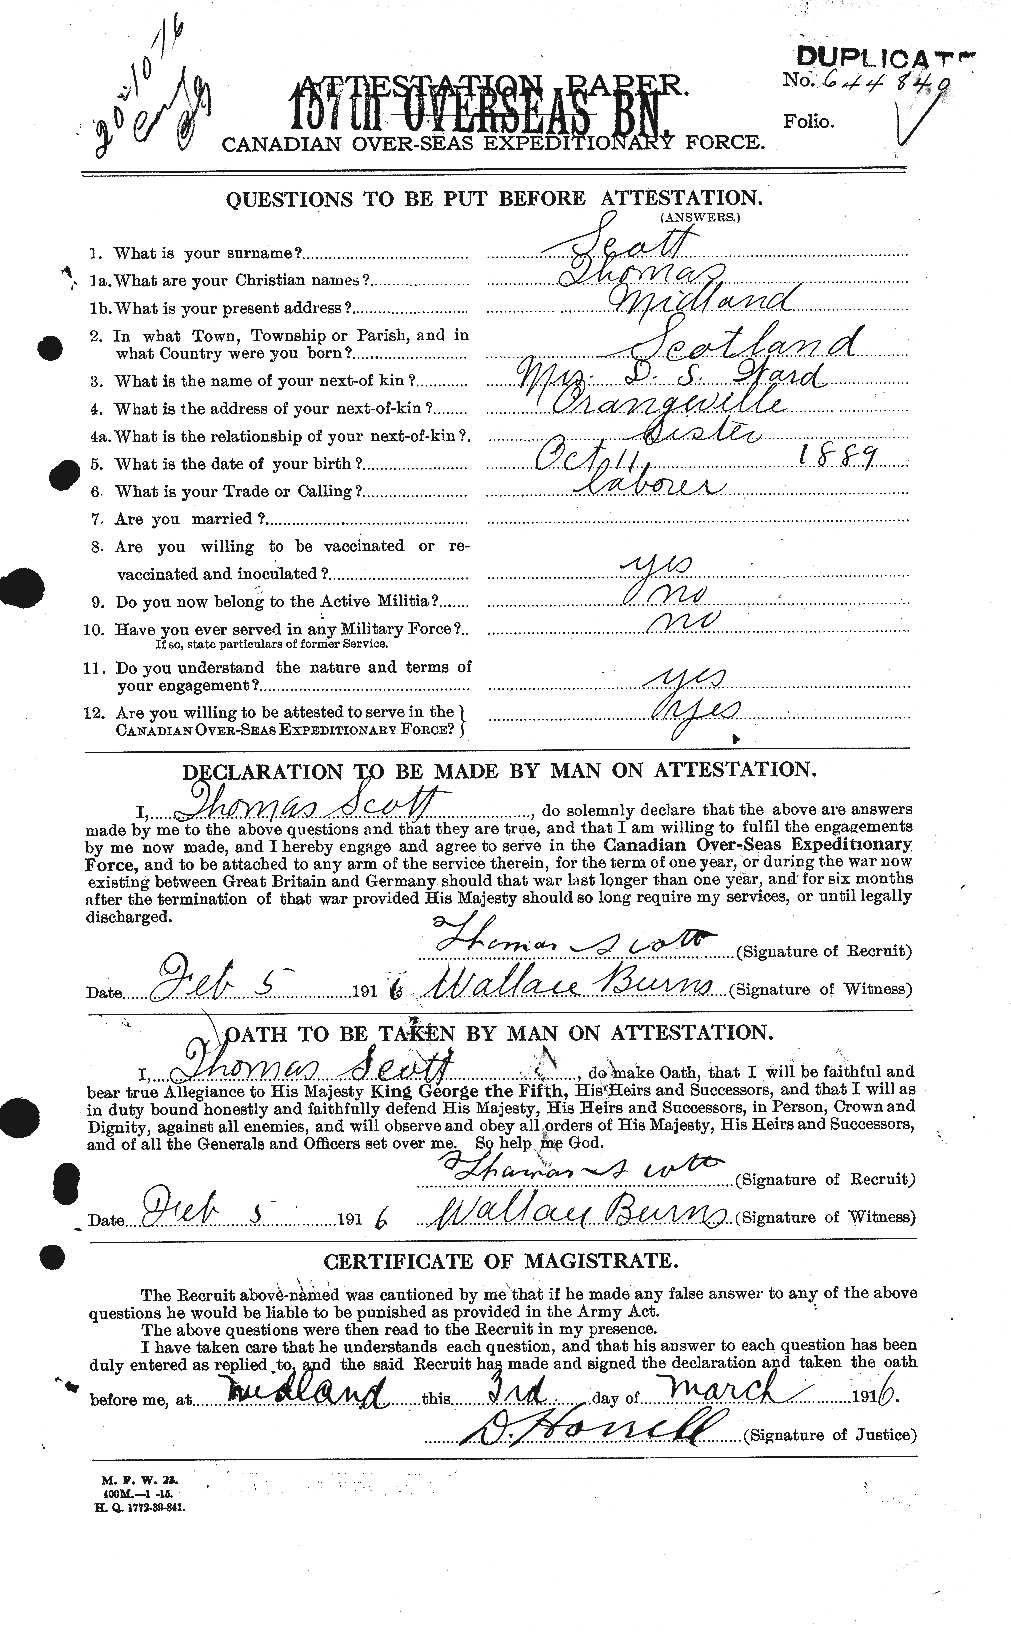 Personnel Records of the First World War - CEF 088529a